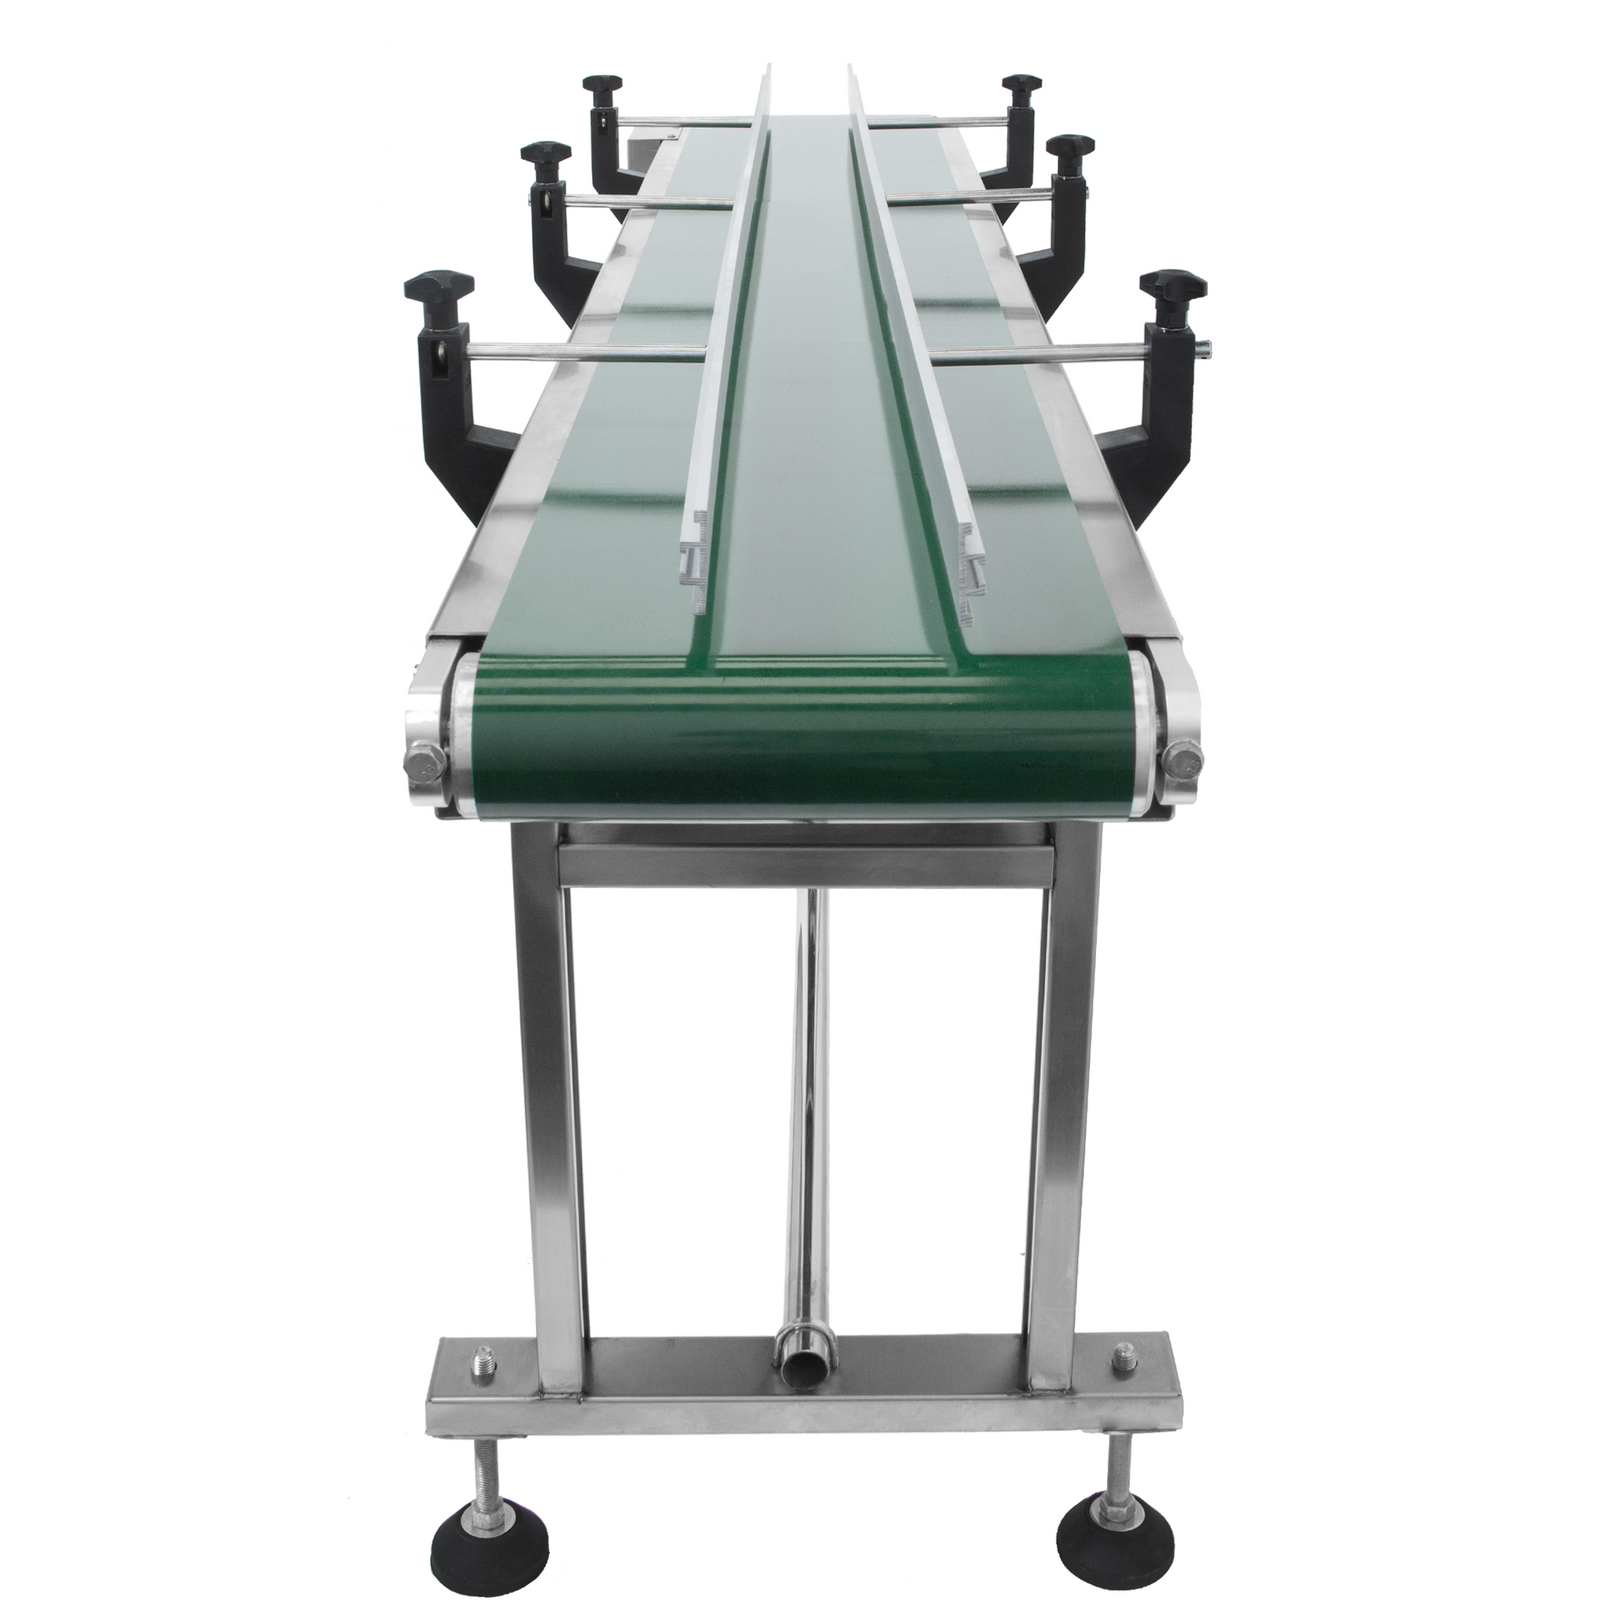 motorized conveyor with steel frame and green belt that features adjusted side guard rails by JORES TECHNOLOGIES®